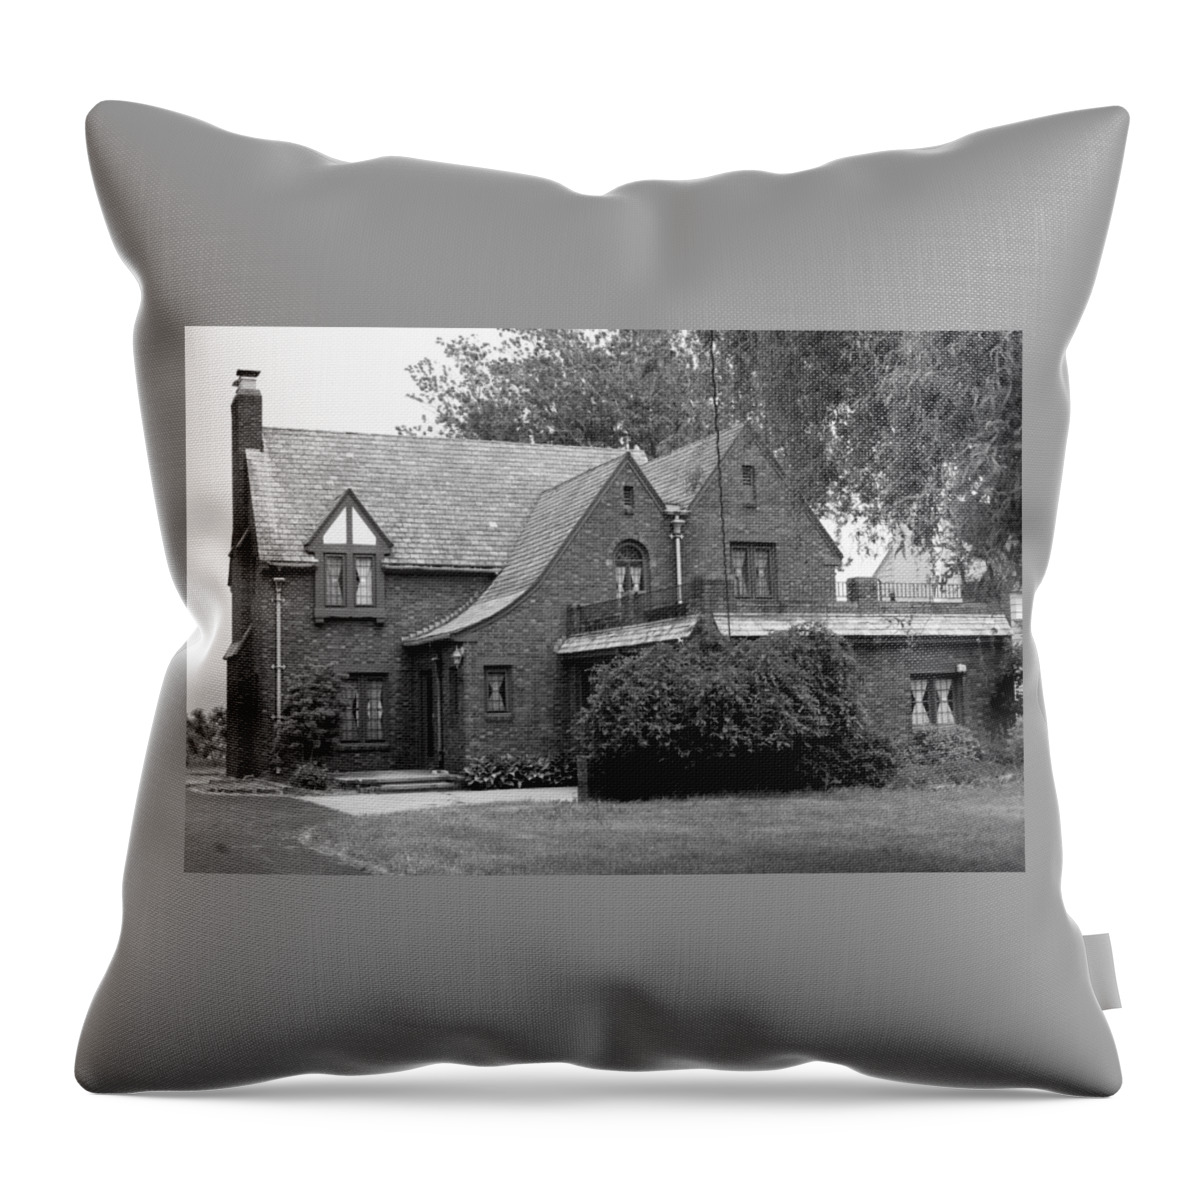 Black And White Photo Throw Pillow featuring the photograph Brick Tutor Home by Valerie Collins